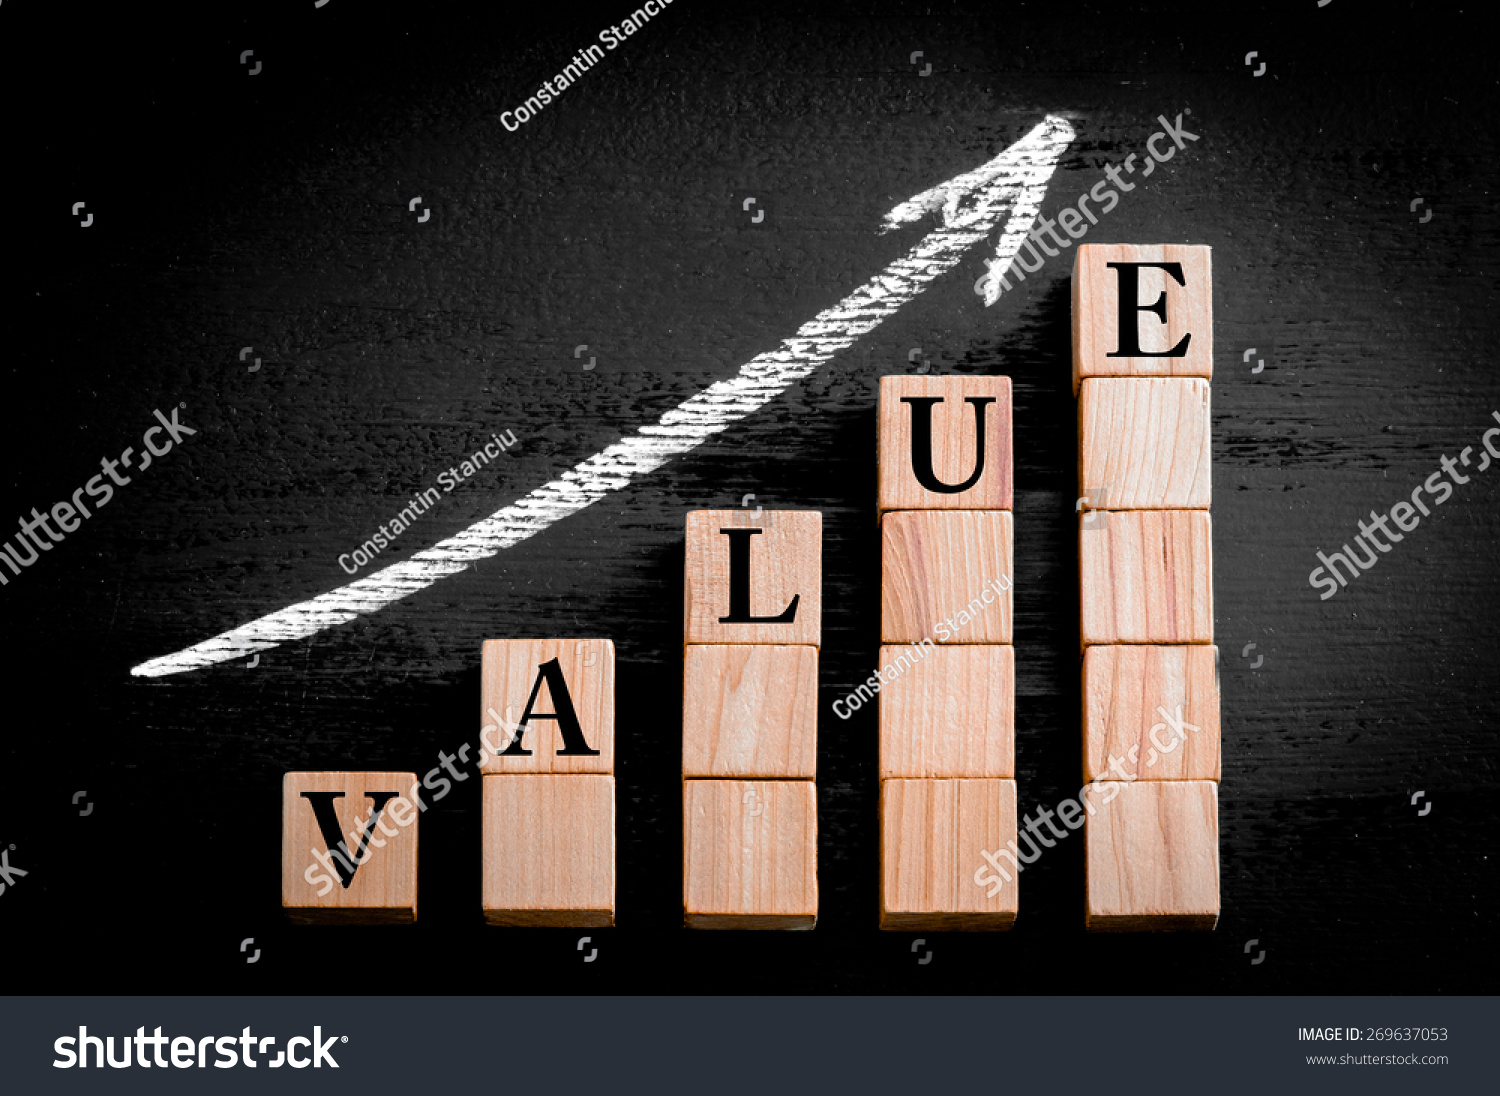 Word VALUE on ascending arrow above bar graph of Wooden small cubes isolated on black background. Chalk drawing on blackboard. Business Concept image. #269637053